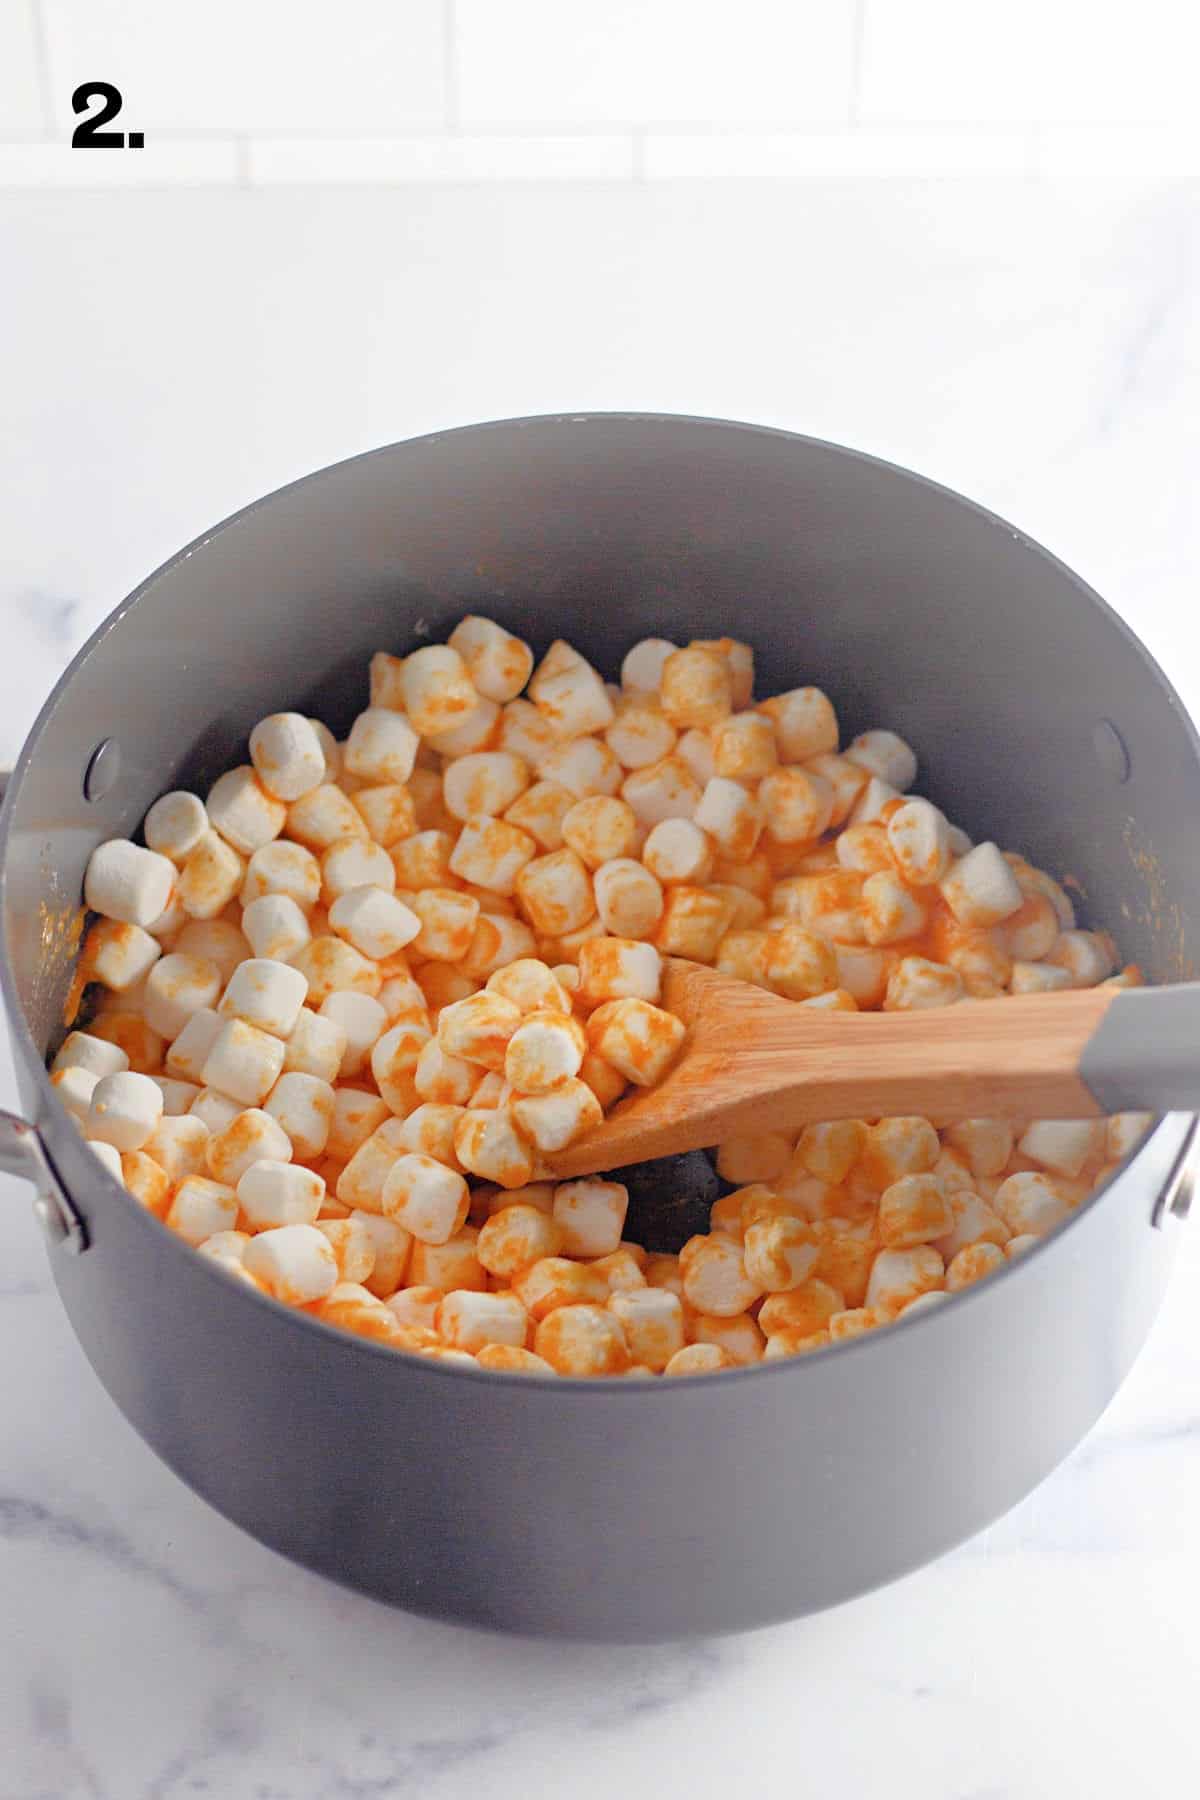 How to Make Pumpkin Spice Rice Krispie Treats Step 2 - adding marshmallows in pan.